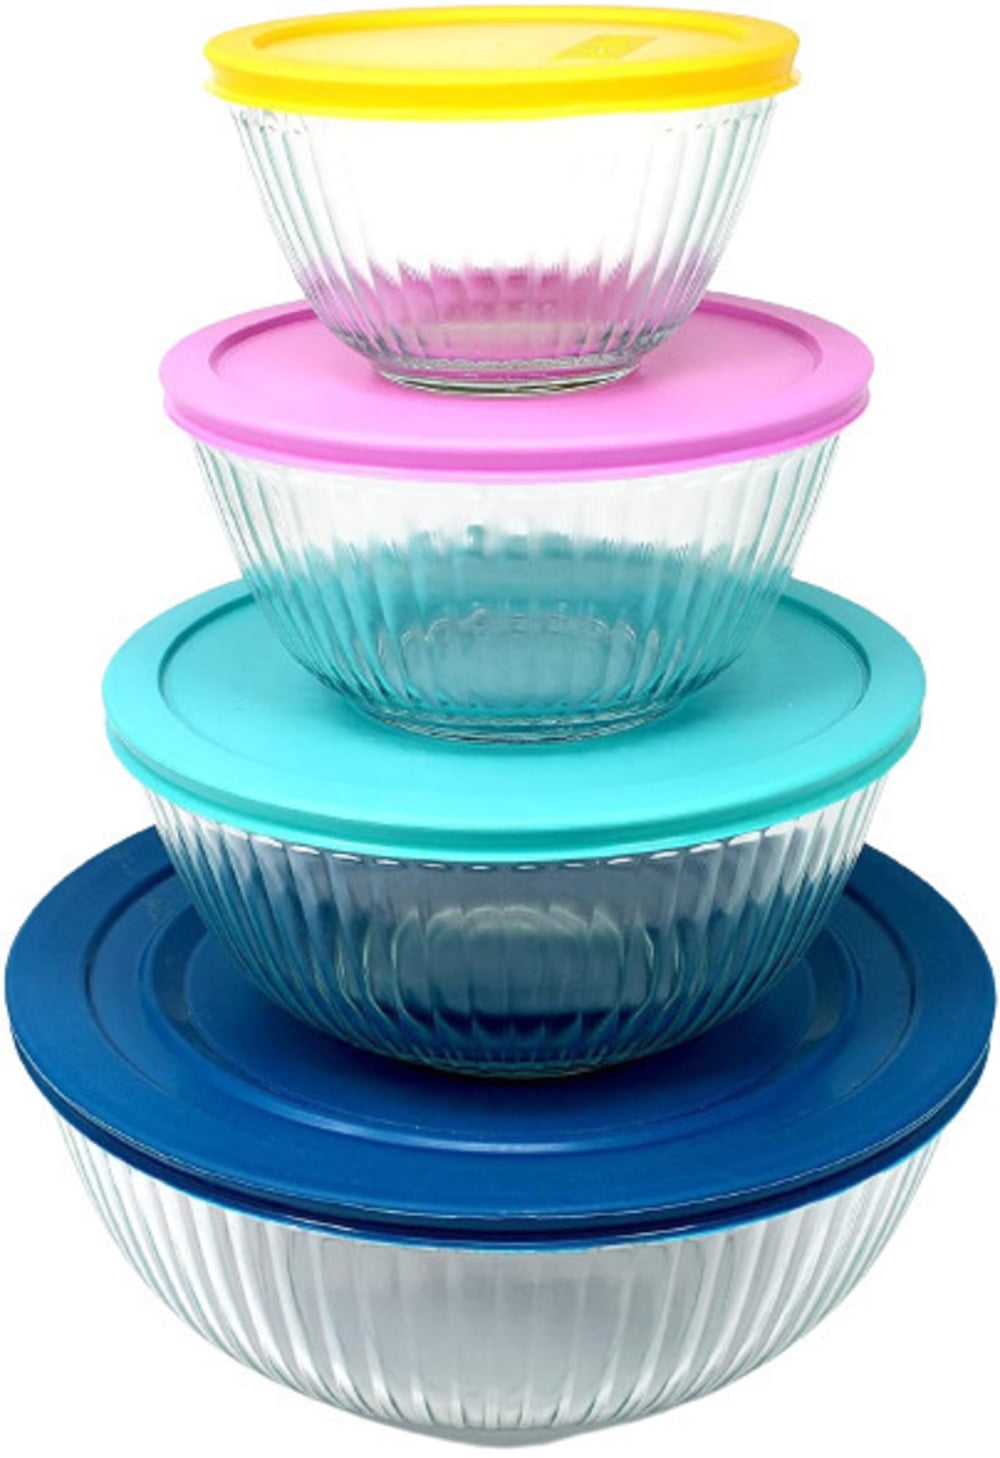 Pyrex 8-piece 100 Years Glass Mixing Bowl Set (Limited Edition) - Assorted  Colors Lids 